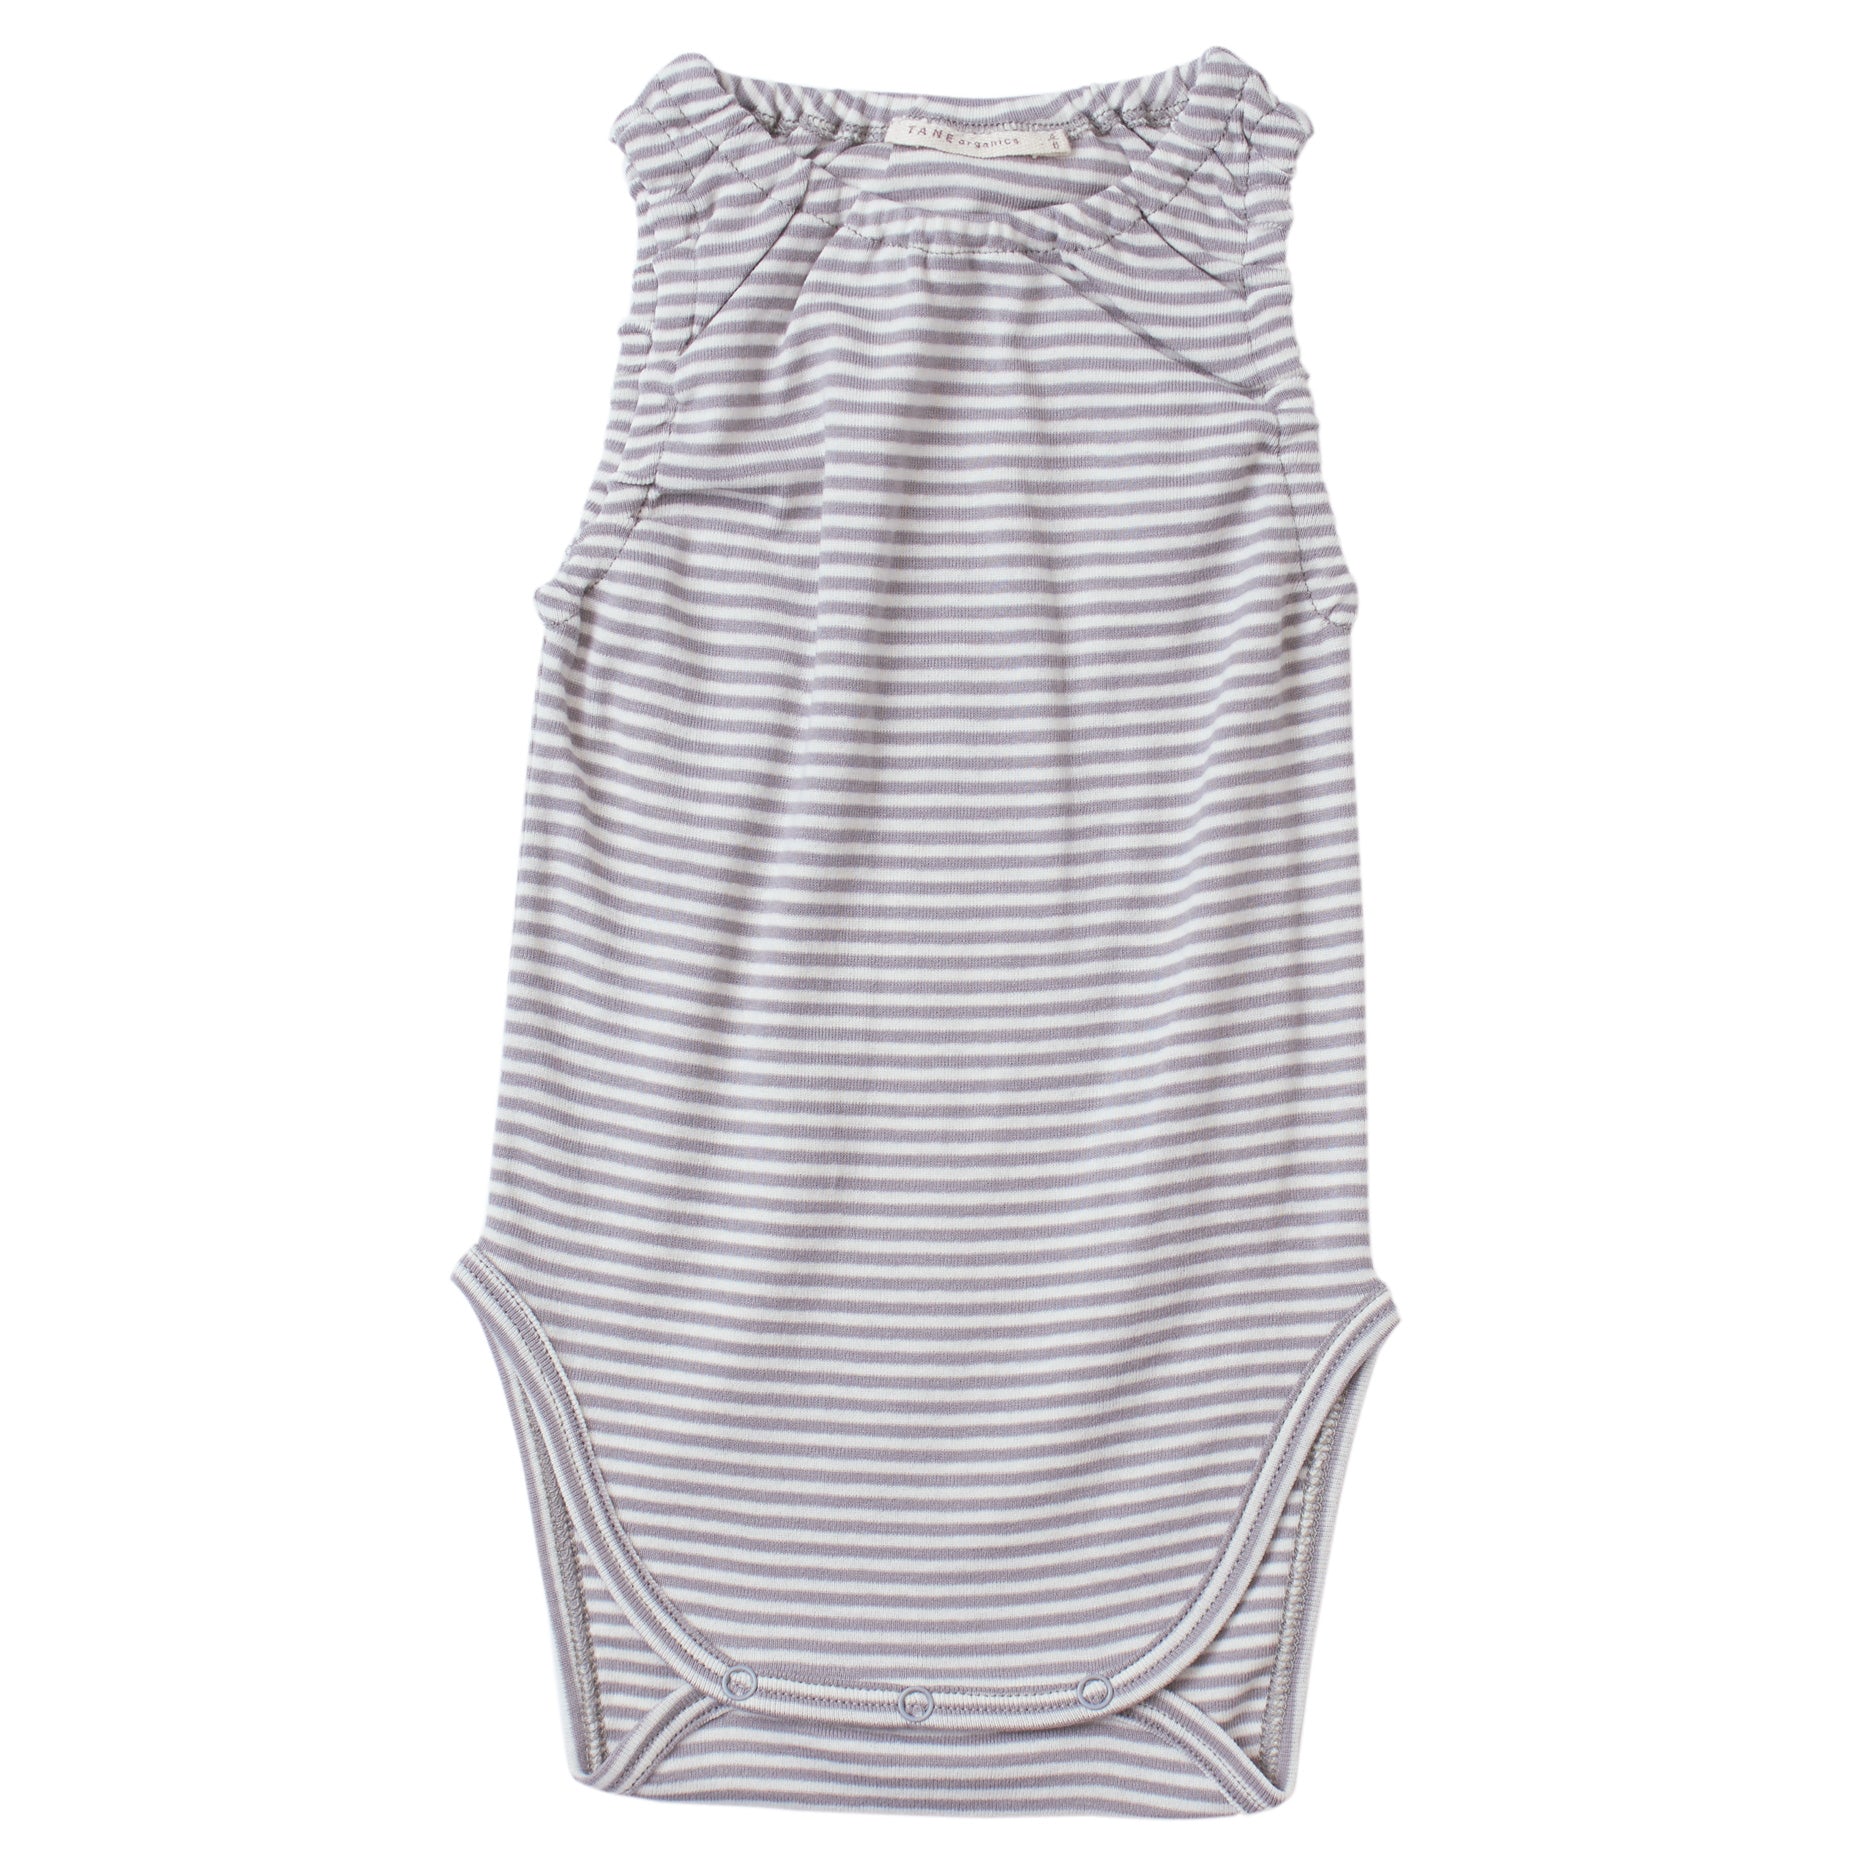 cool grey and cream color petite stripes on a sleeveless crewneck onesie with soft encased elastics at neck and armhole trim.  100% organic cotton petite stripe knit.